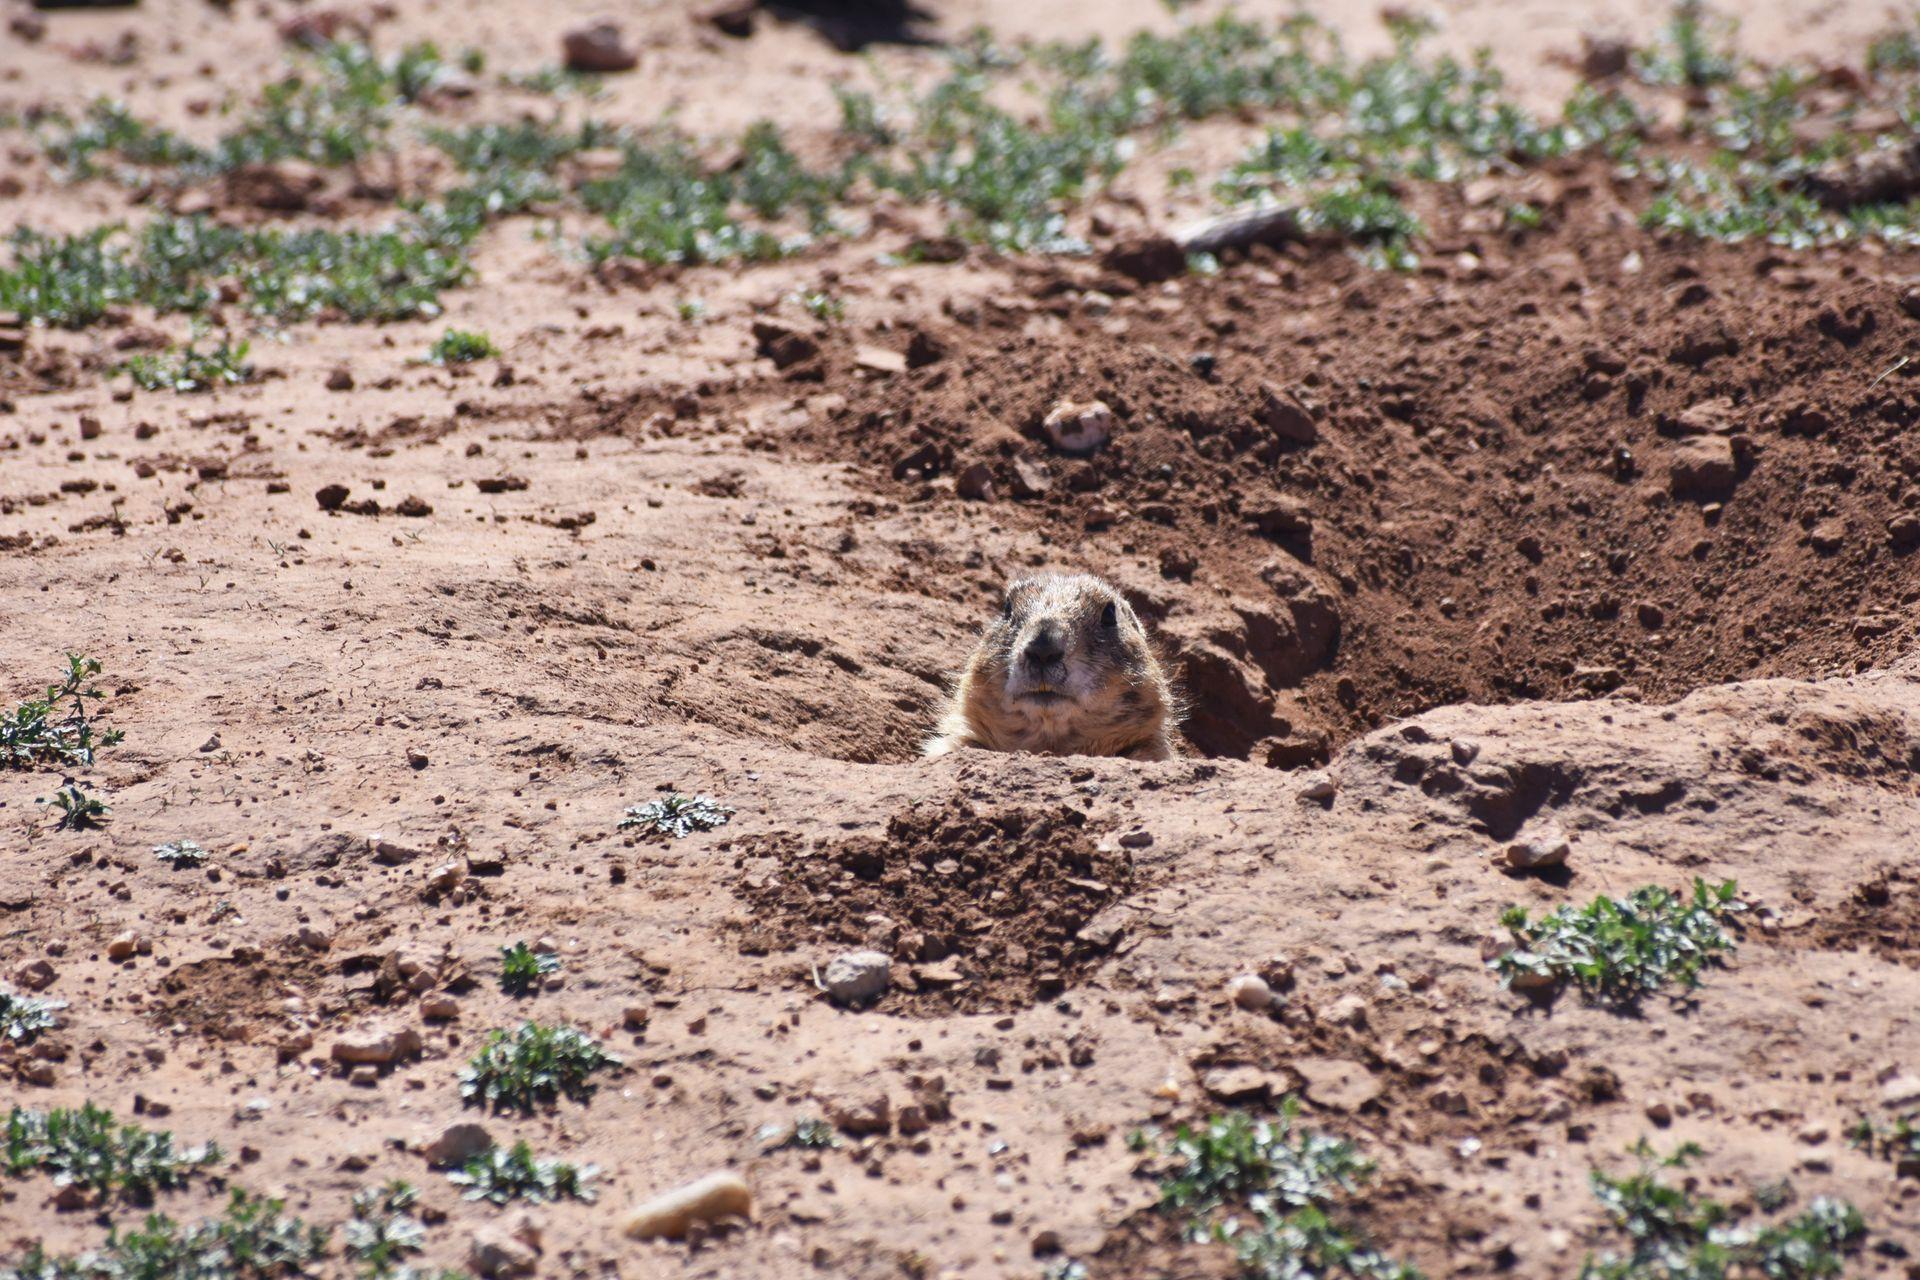 A prairie dog sticking its head up out of a hole. It is not uncommon to see Prairie Dogs in Caprock Canyon.